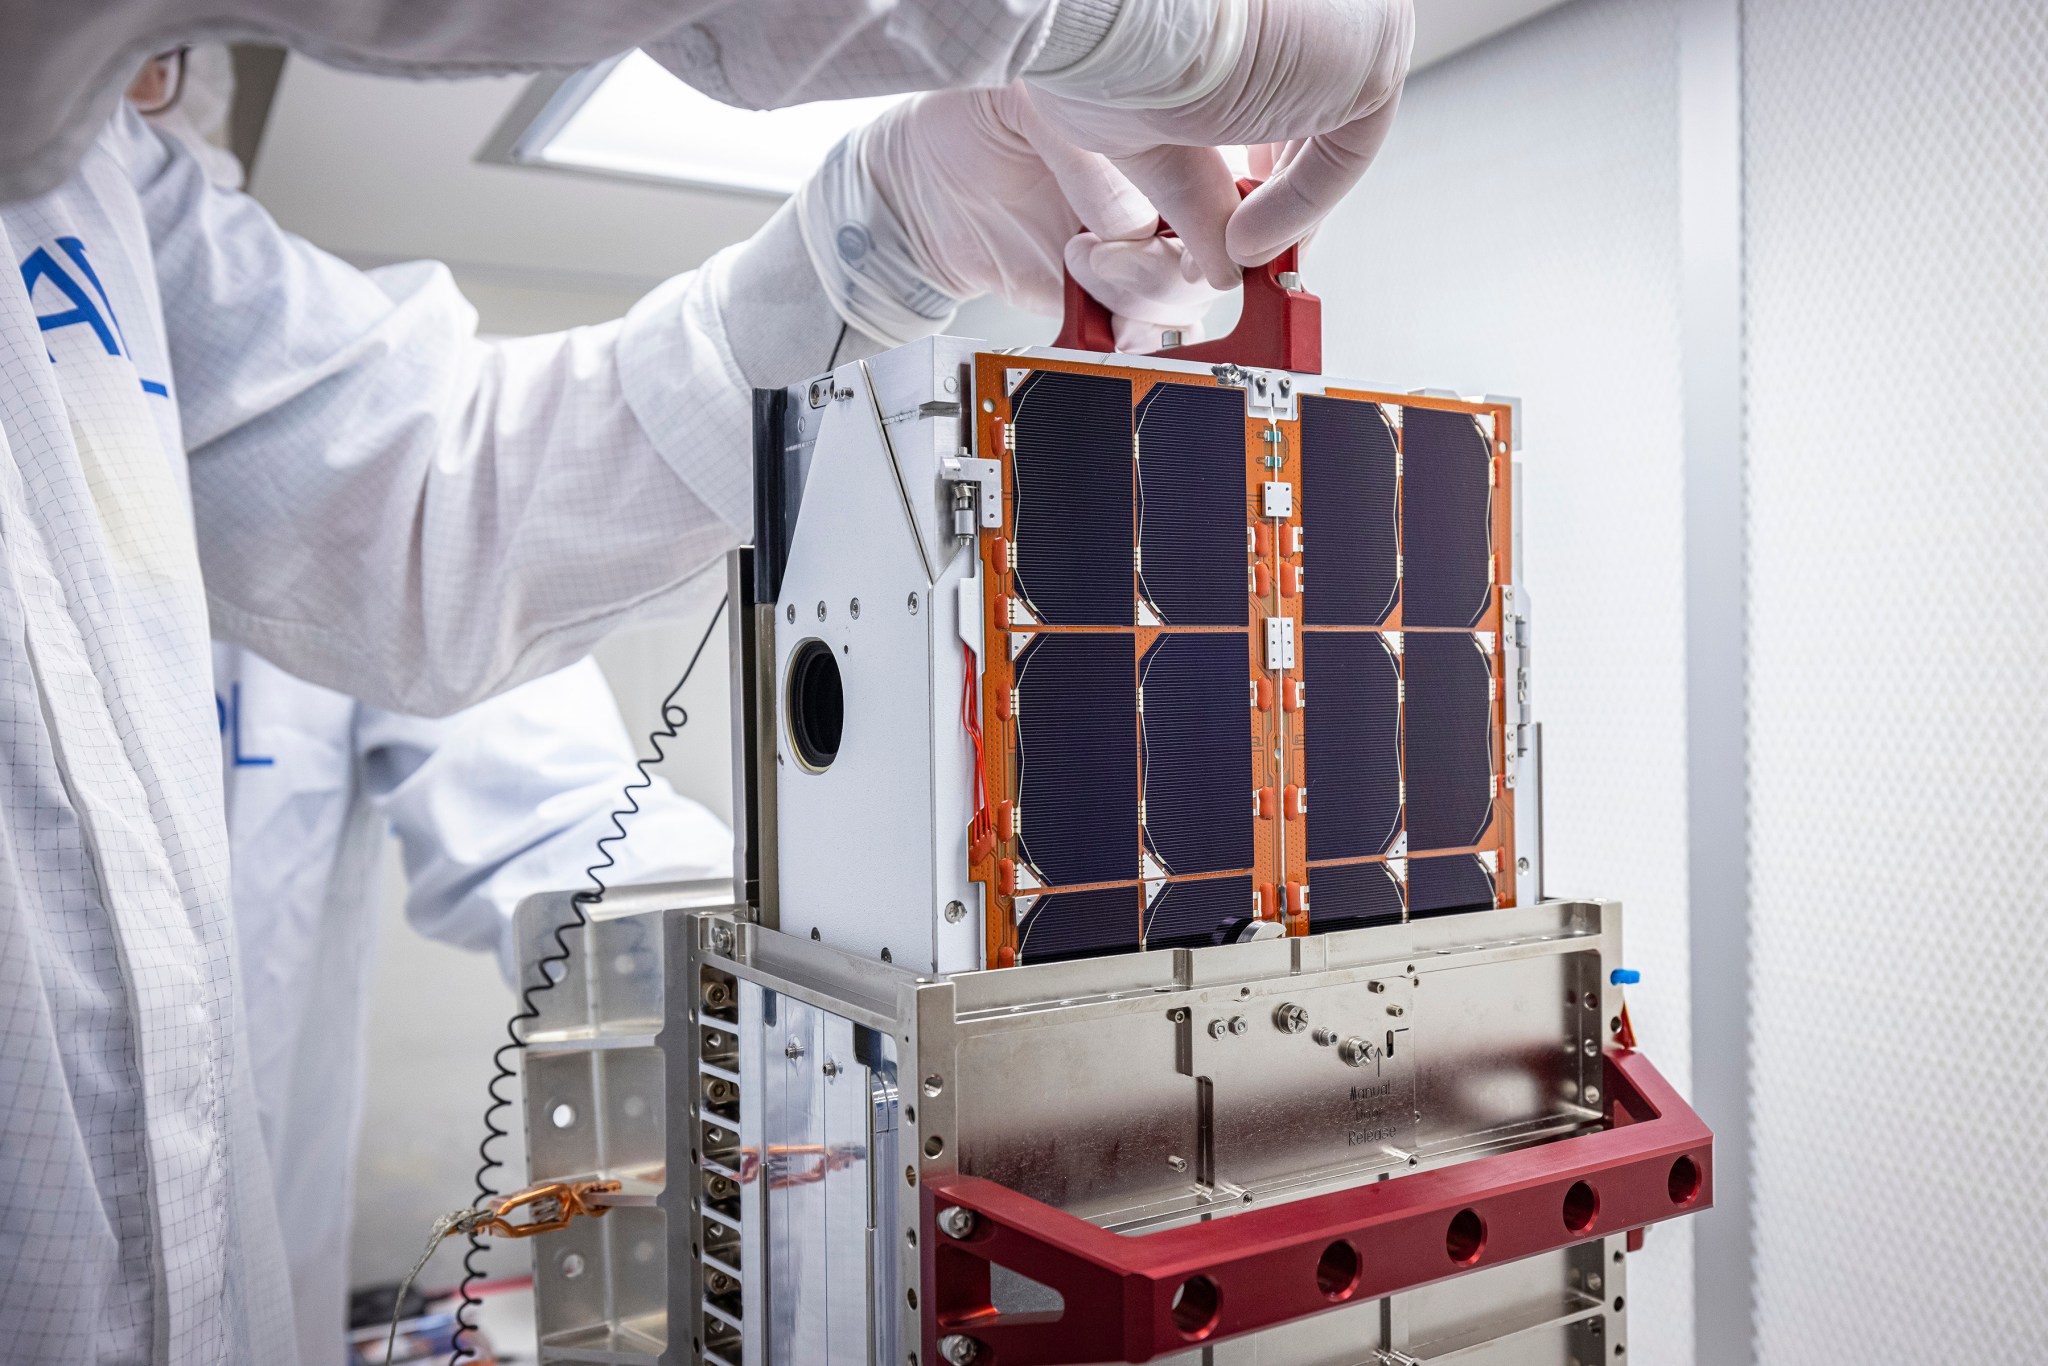 DART team engineers lift and inspect the LICIACube CubeSat